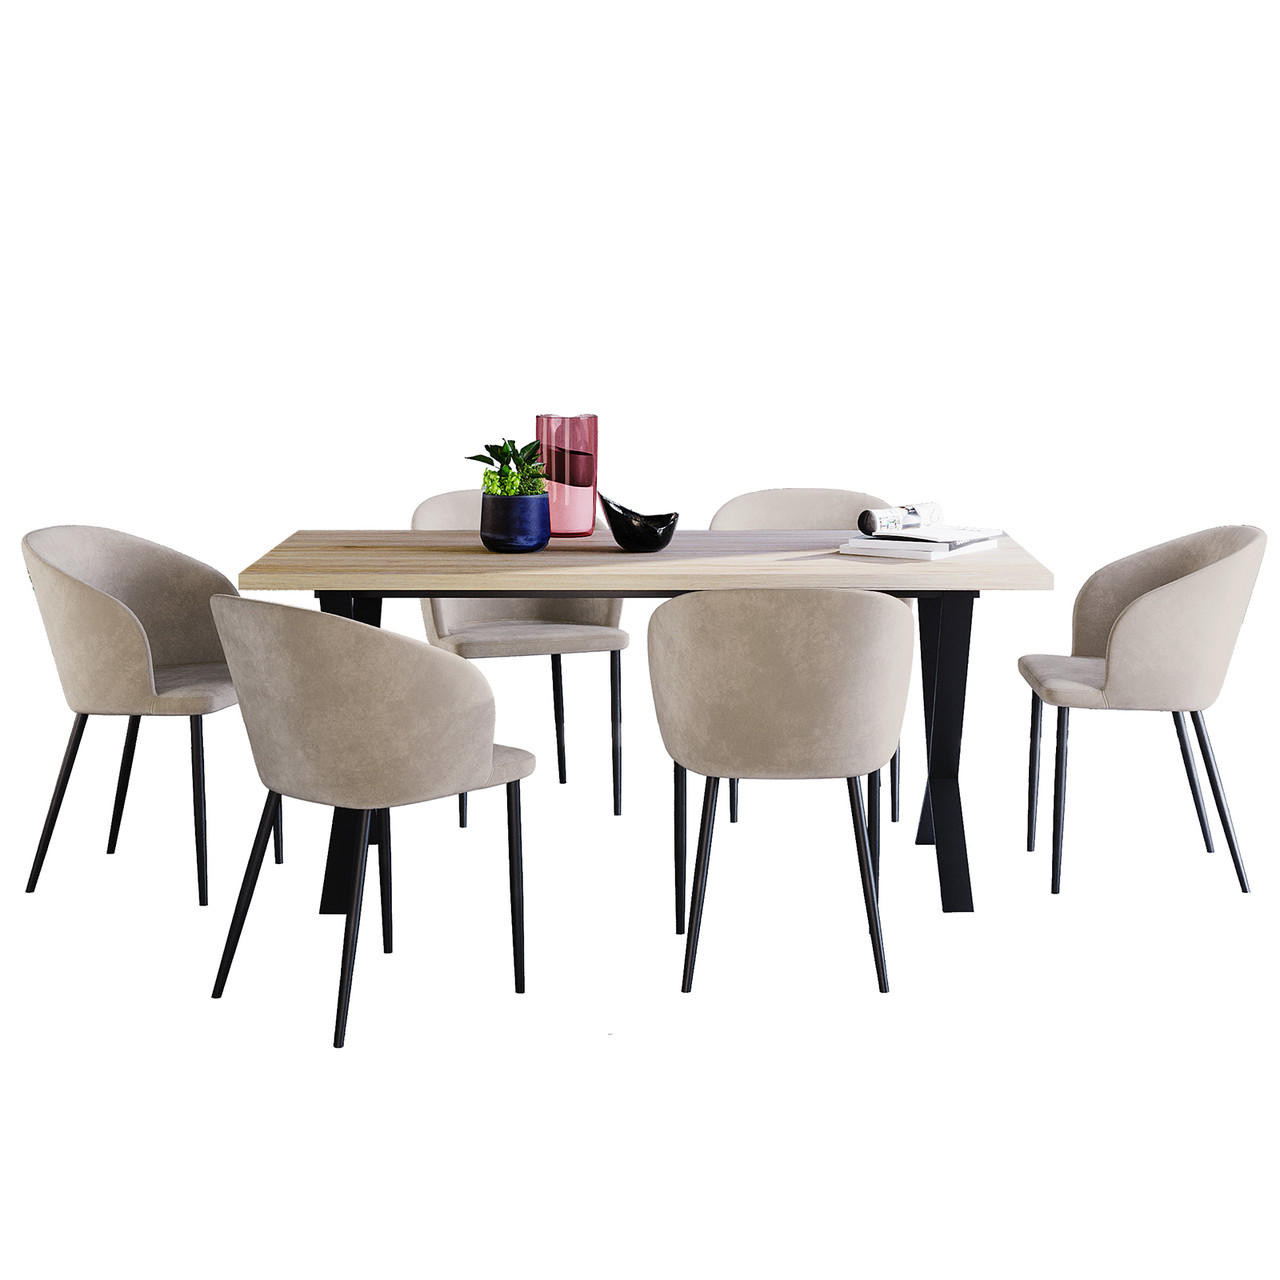 Wesley 180cm Table and 6 Chase Warm Grey Chairs Dining Set